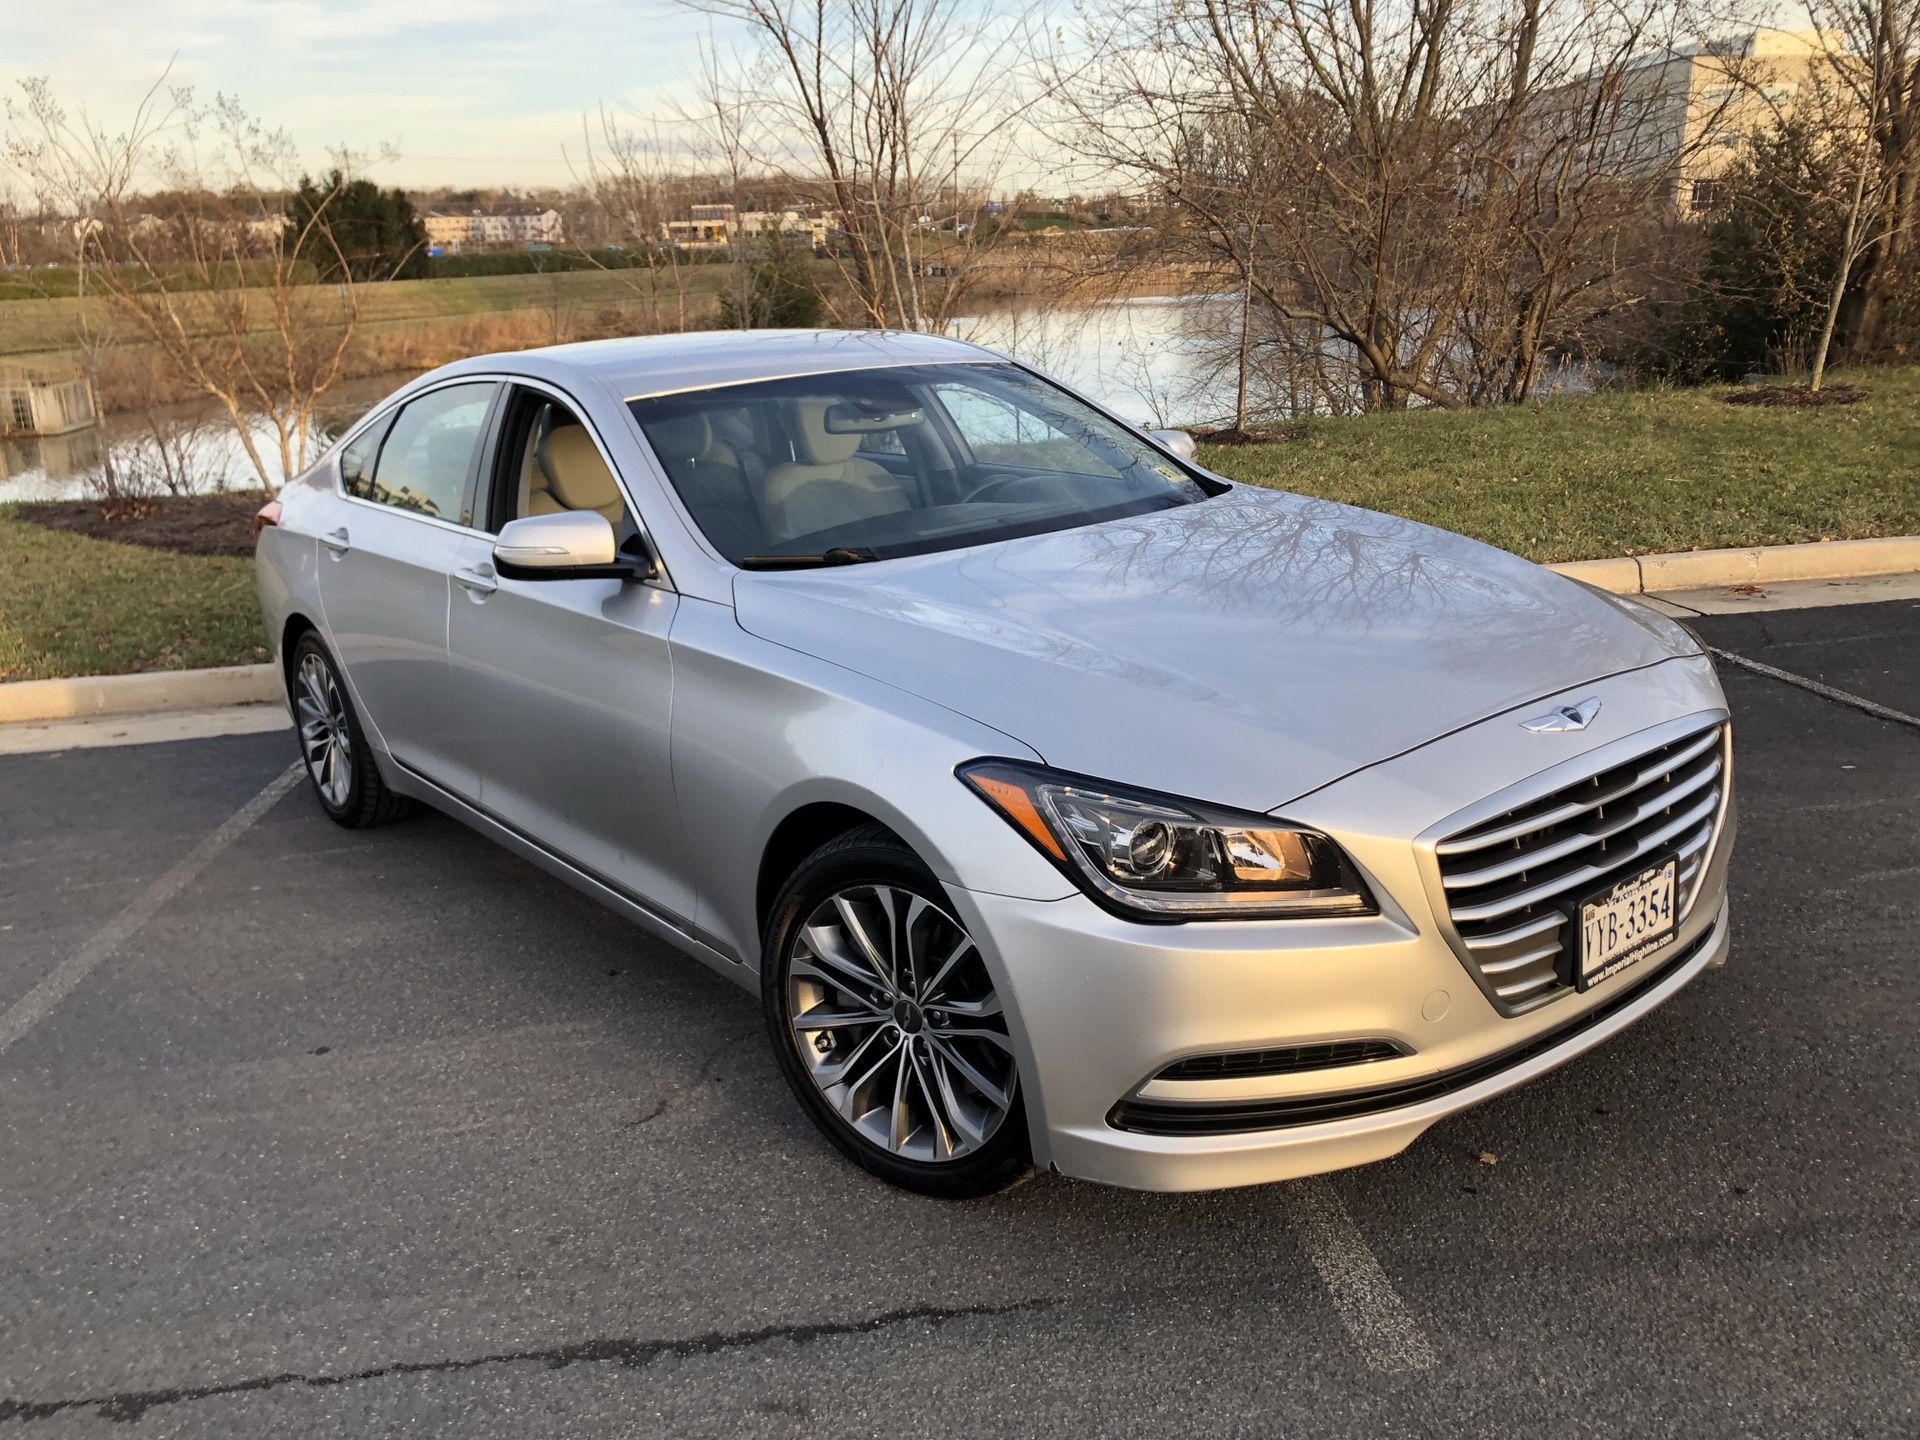 2015 Hyundai Genesis 3.8 v6 clean title low miles! Fully loaded tech